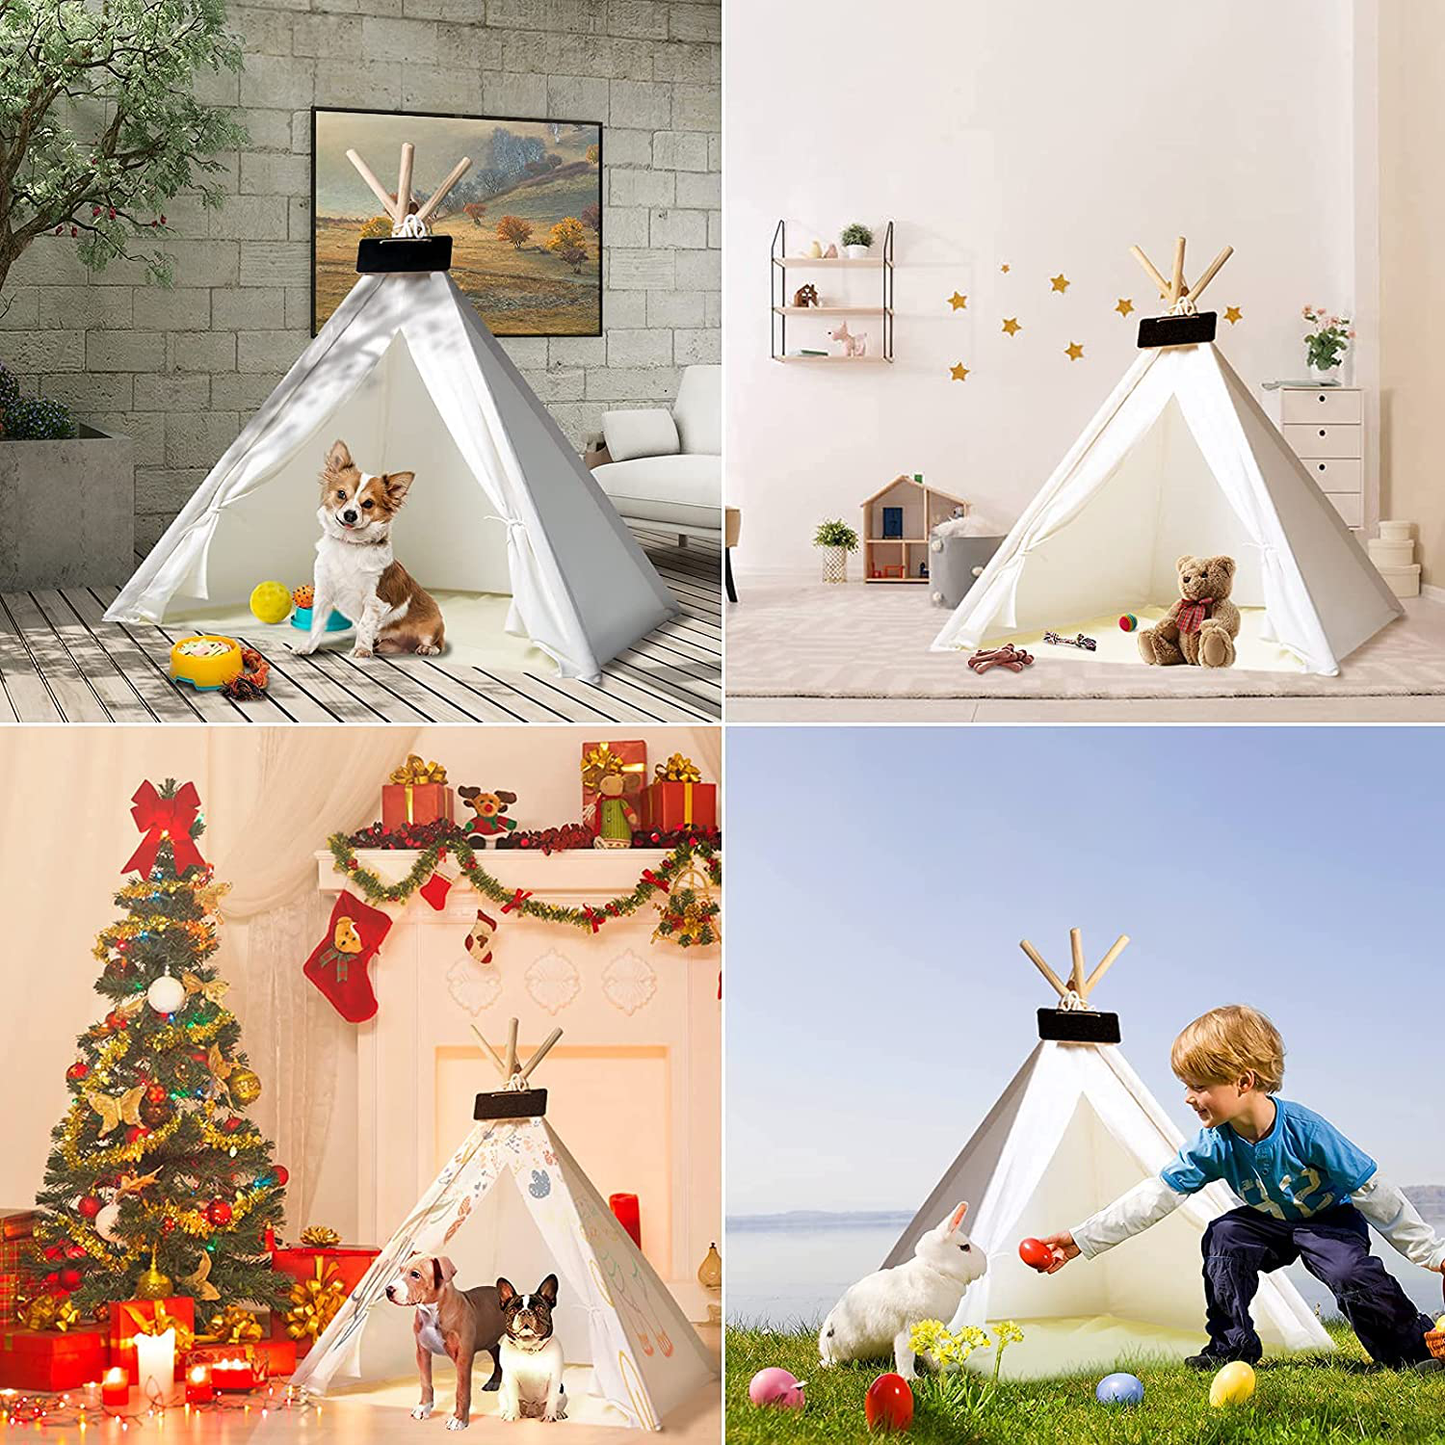 IREENUO Pet Teepee Tent for Dogs Cats, 33Inches Medium Size Dogs Tent House for Small Medium Dogs with Durable Material Animals & Pet Supplies > Pet Supplies > Dog Supplies > Dog Houses IREENUO   